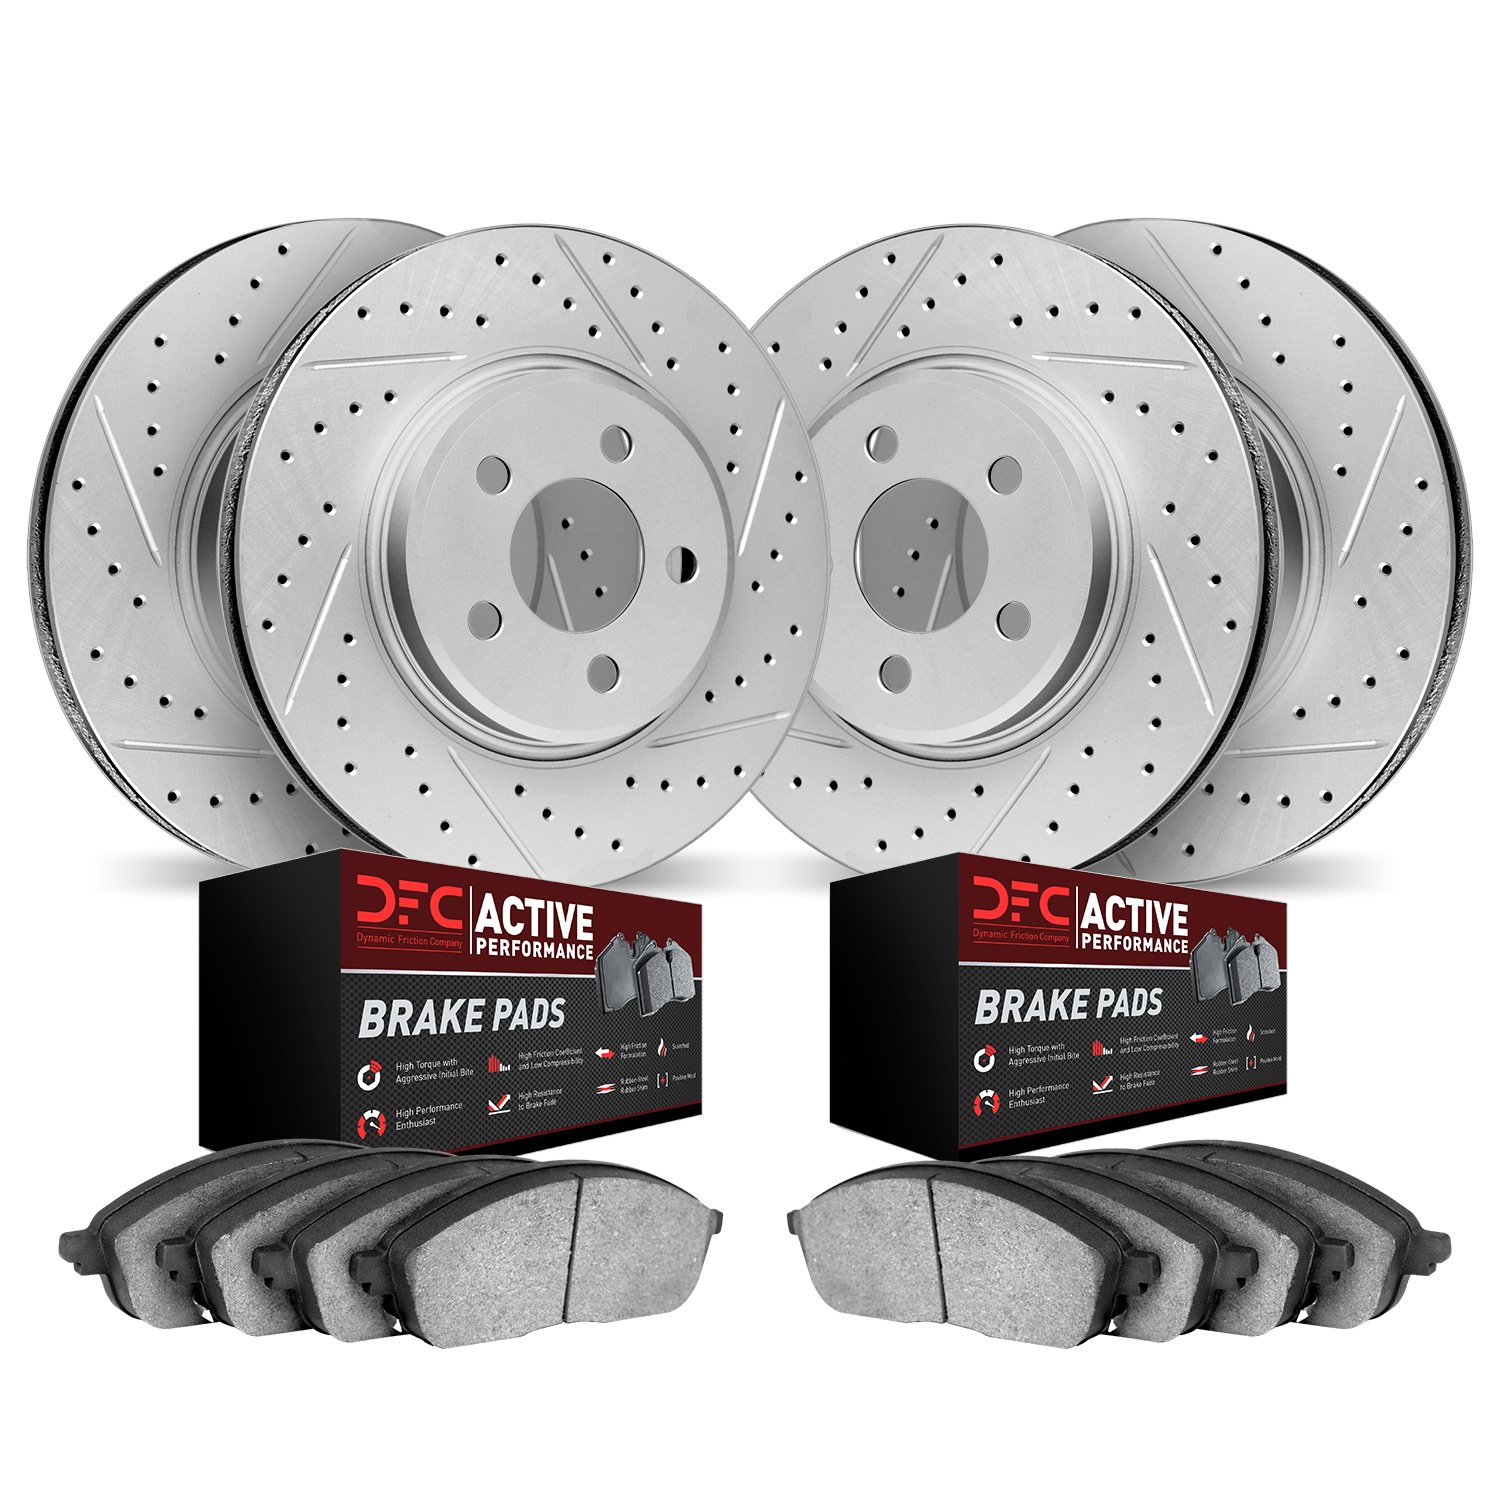 2704-67054 Geoperformance Drilled/Slotted Brake Rotors with Active Performance Pads Kit, 2005-2014 Infiniti/Nissan, Position: Fr